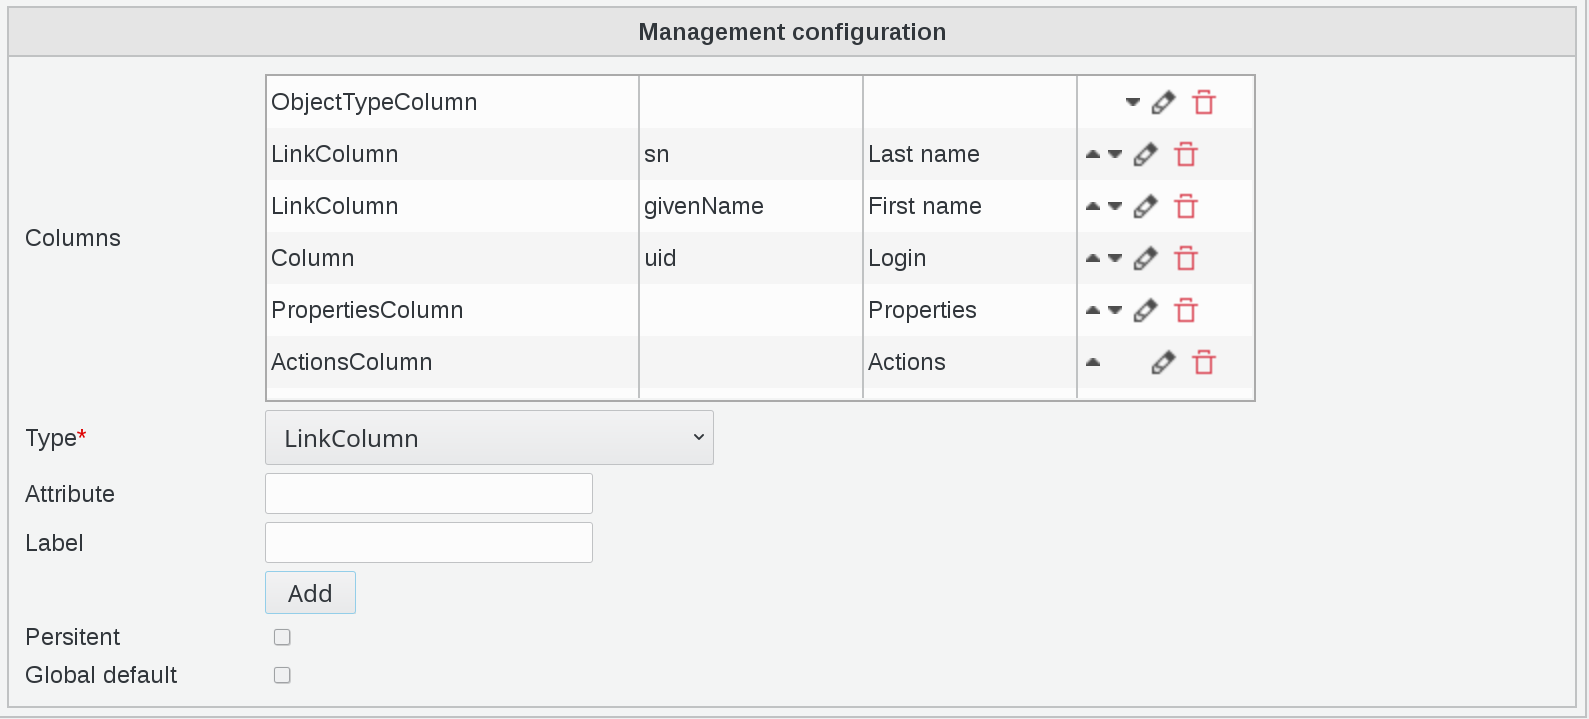 Picture of Configurable lists configuration page in FusionDirectory